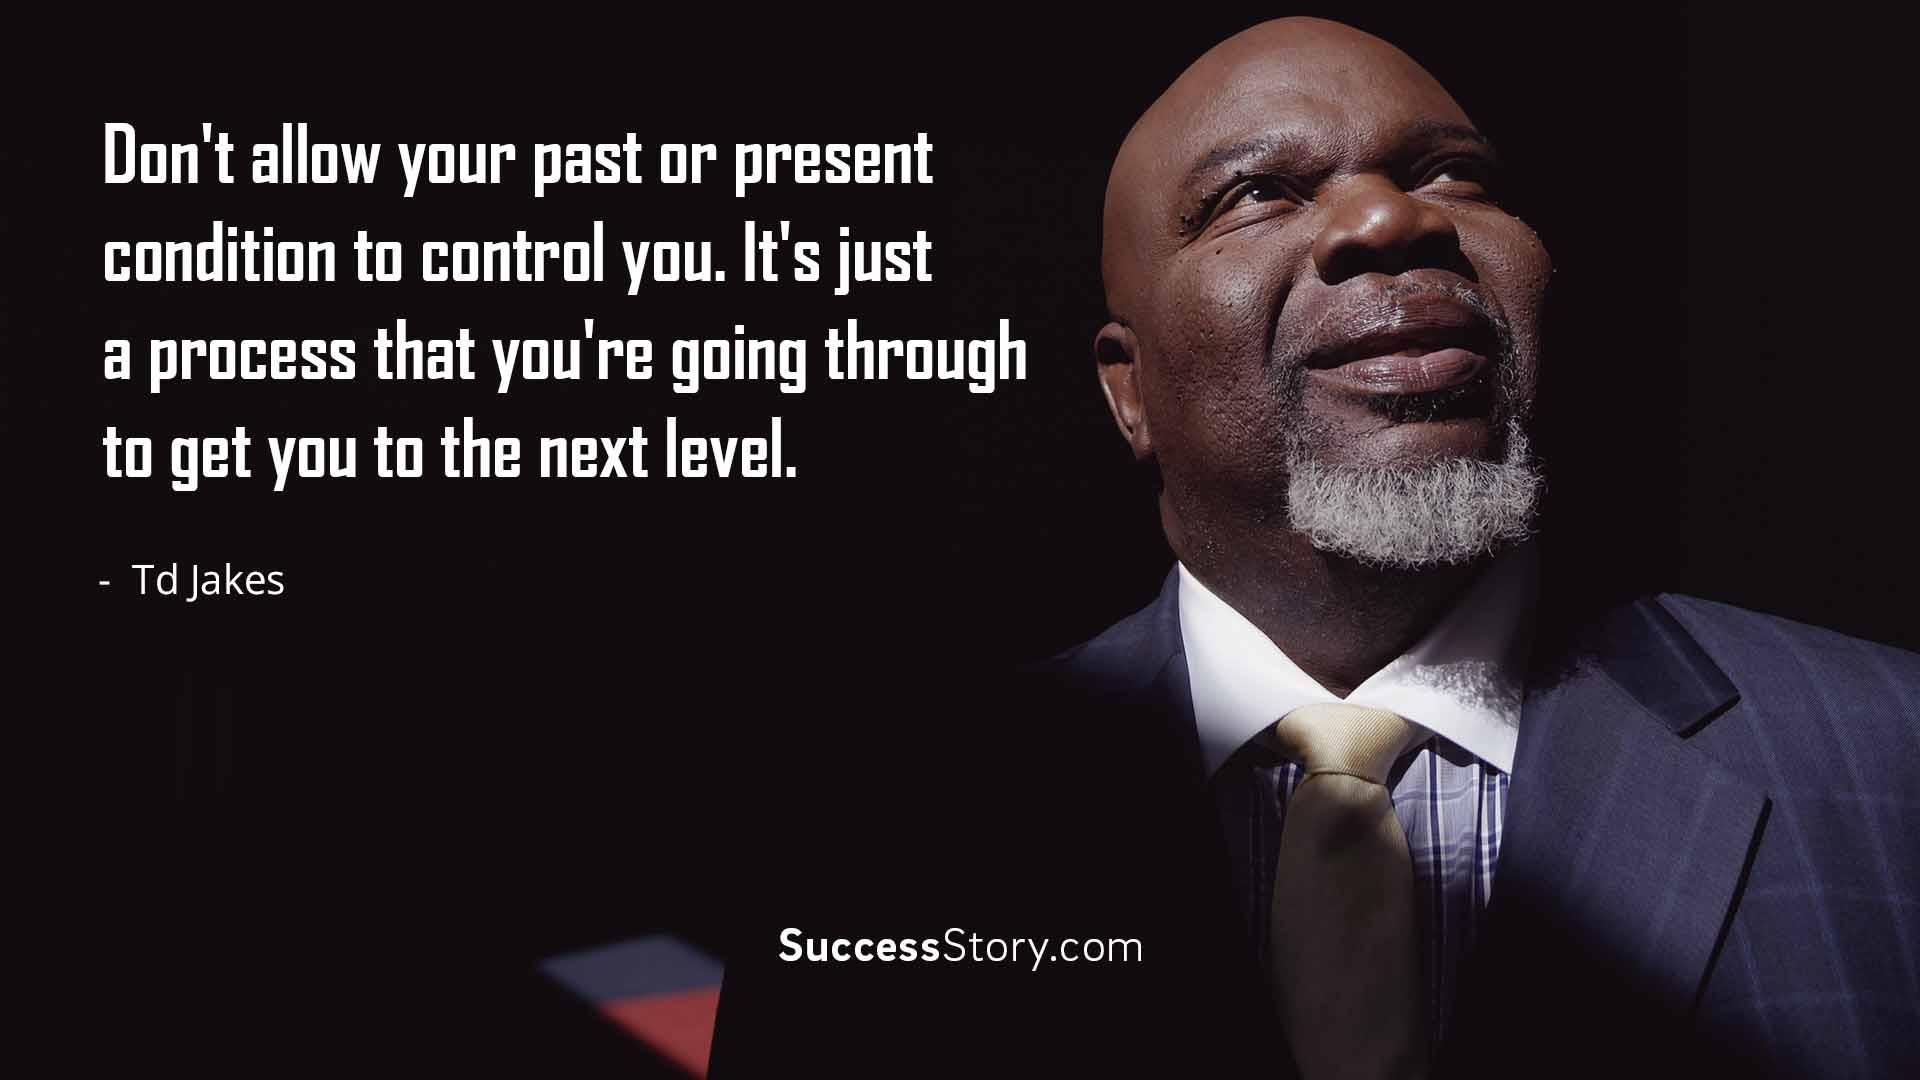 T.D.Jakes Quotes On Relationships
 Expand your mindset with Bishop T D Jakes and others